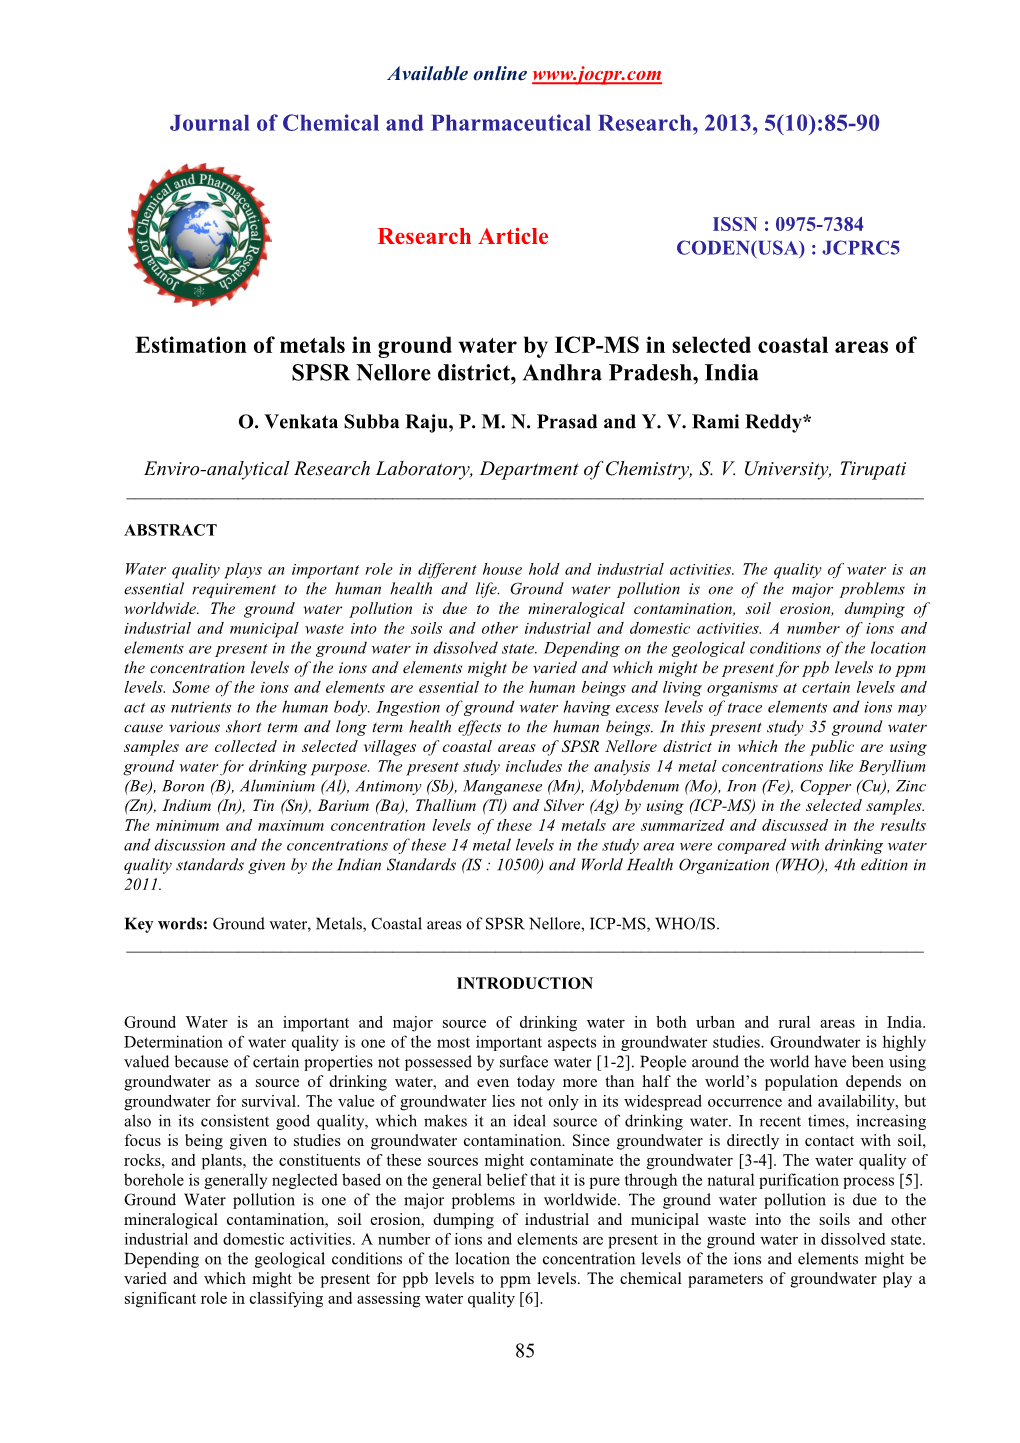 Estimation of Metals in Ground Water by ICP-MS in Selected Coastal Areas of SPSR Nellore District, Andhra Pradesh, India